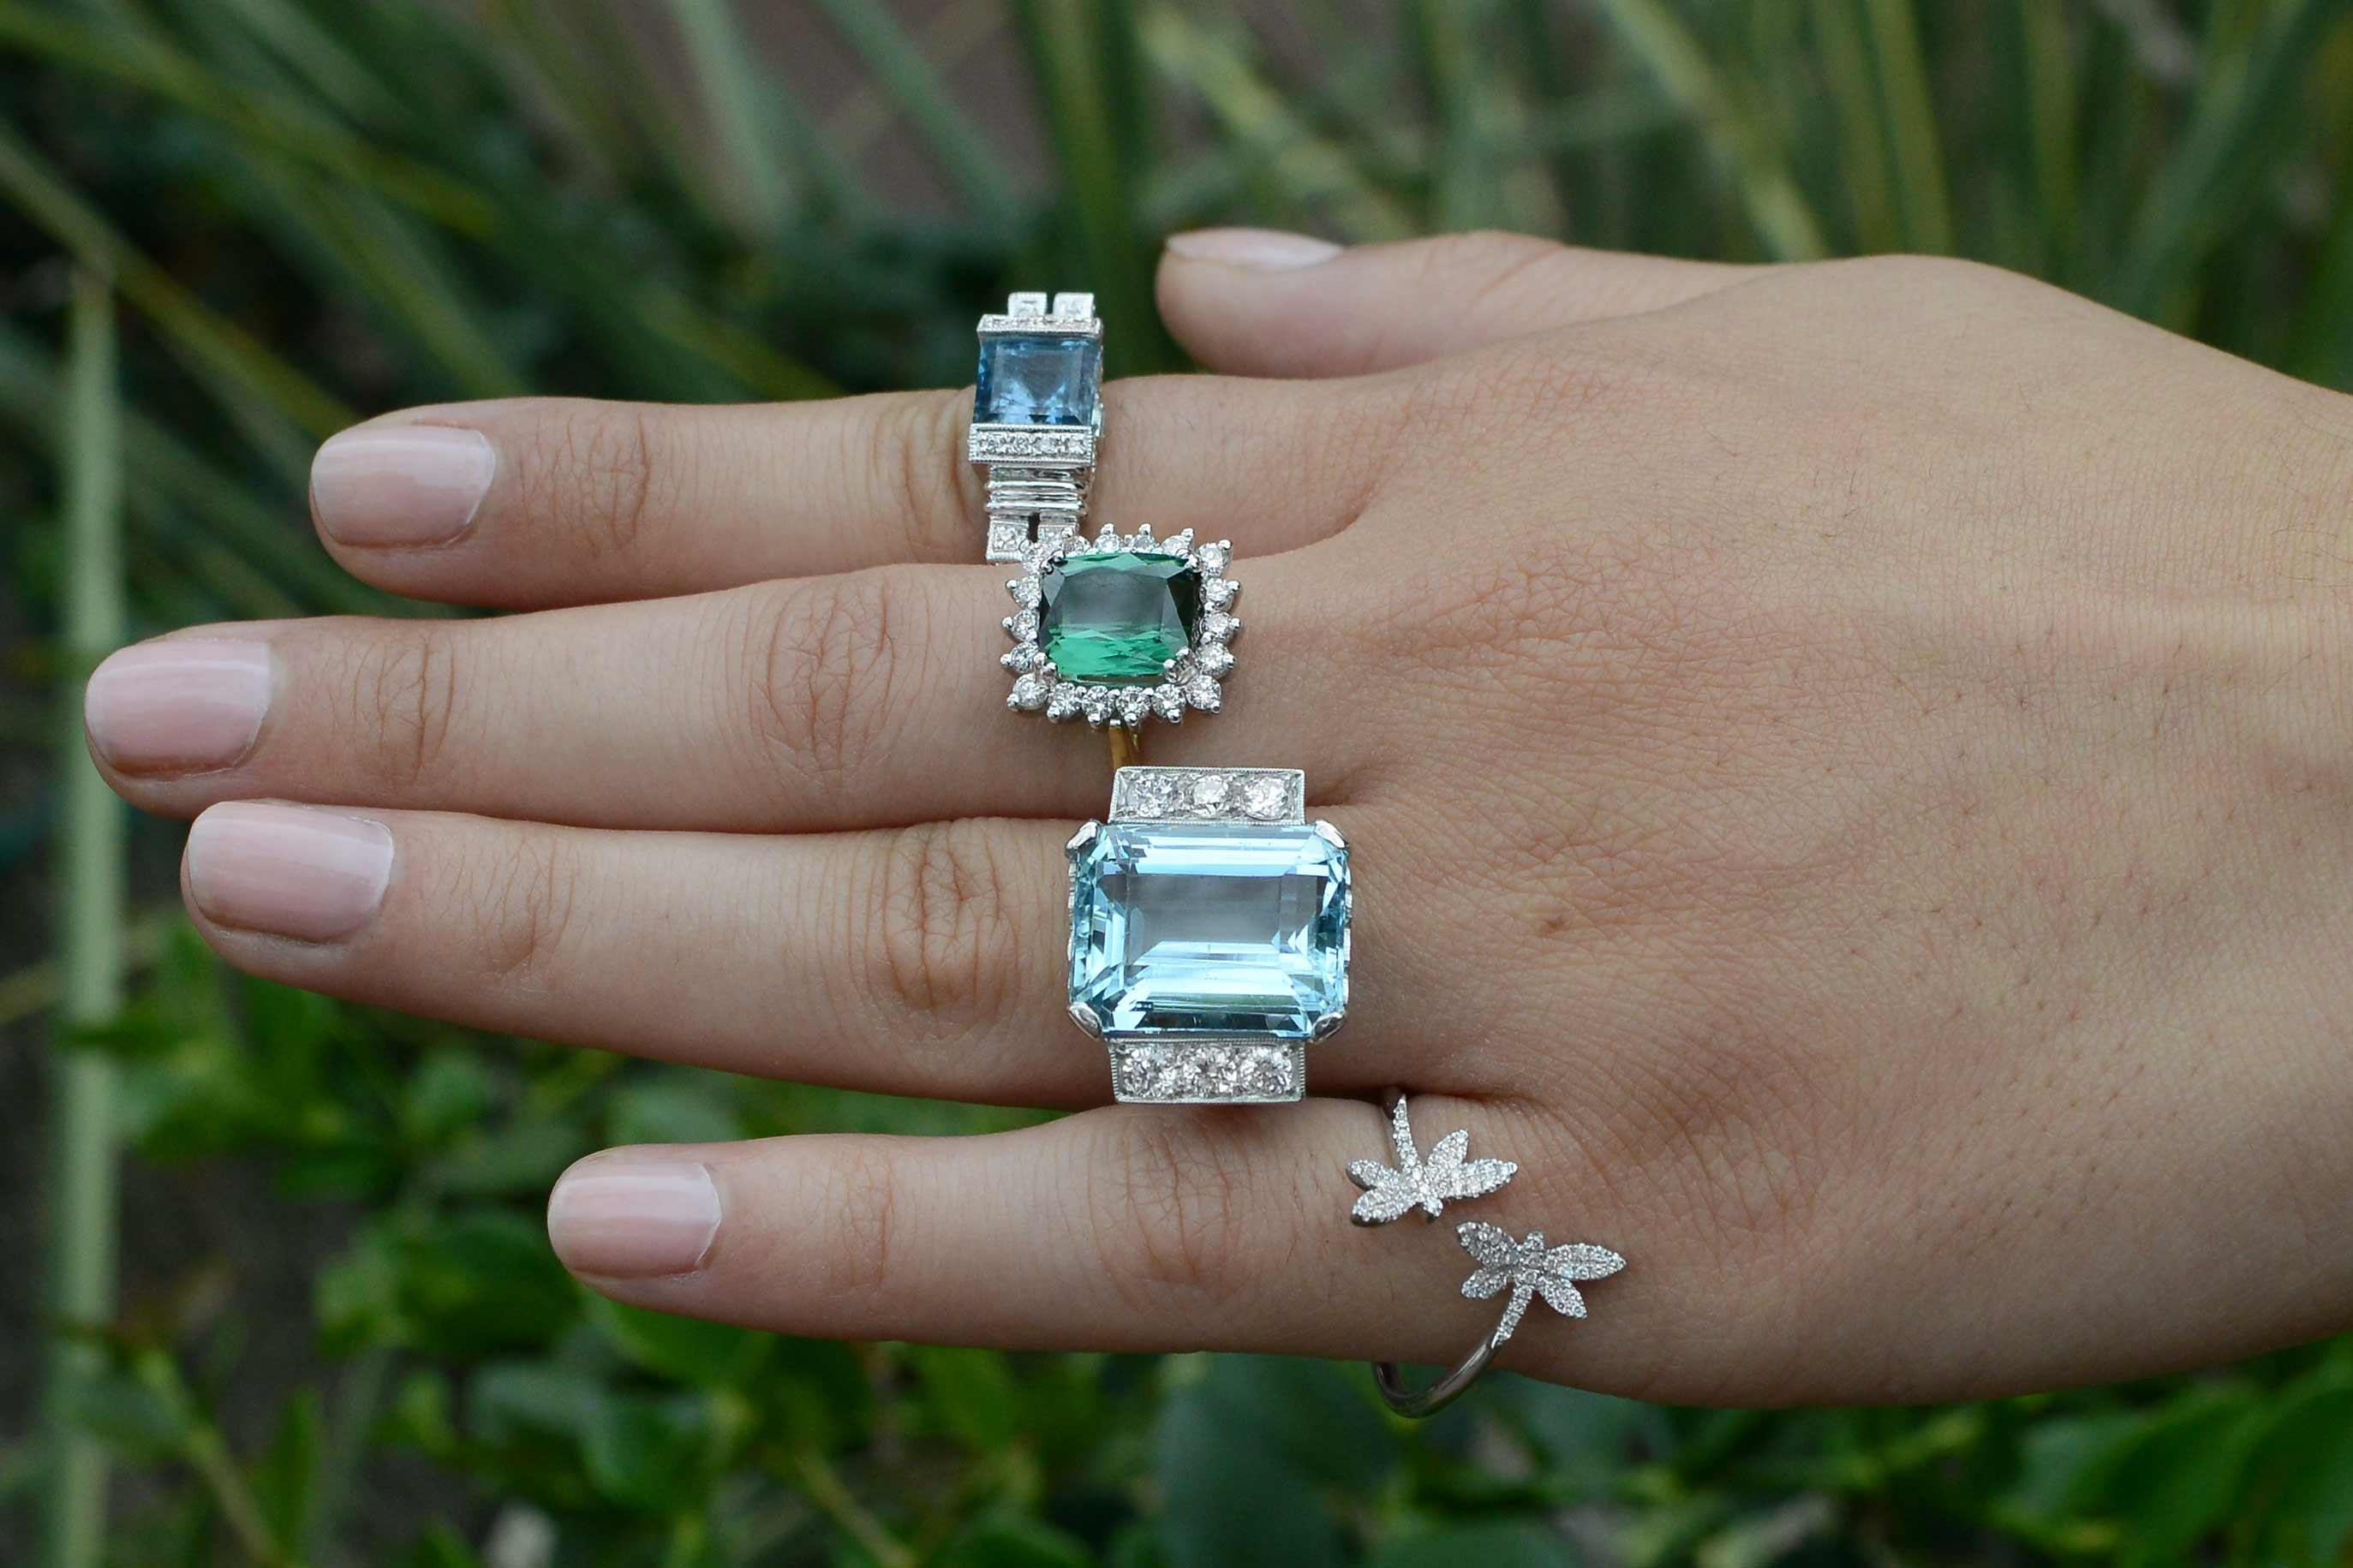 A swoon-worthy HUGE 15 carat Aquamarine statement jewel that will command attention. The emerald cut produces a most pleasing sky-blue hue (no yellow or greenish cast) and posing regally in it's original retro 1940s platinum setting, having gently